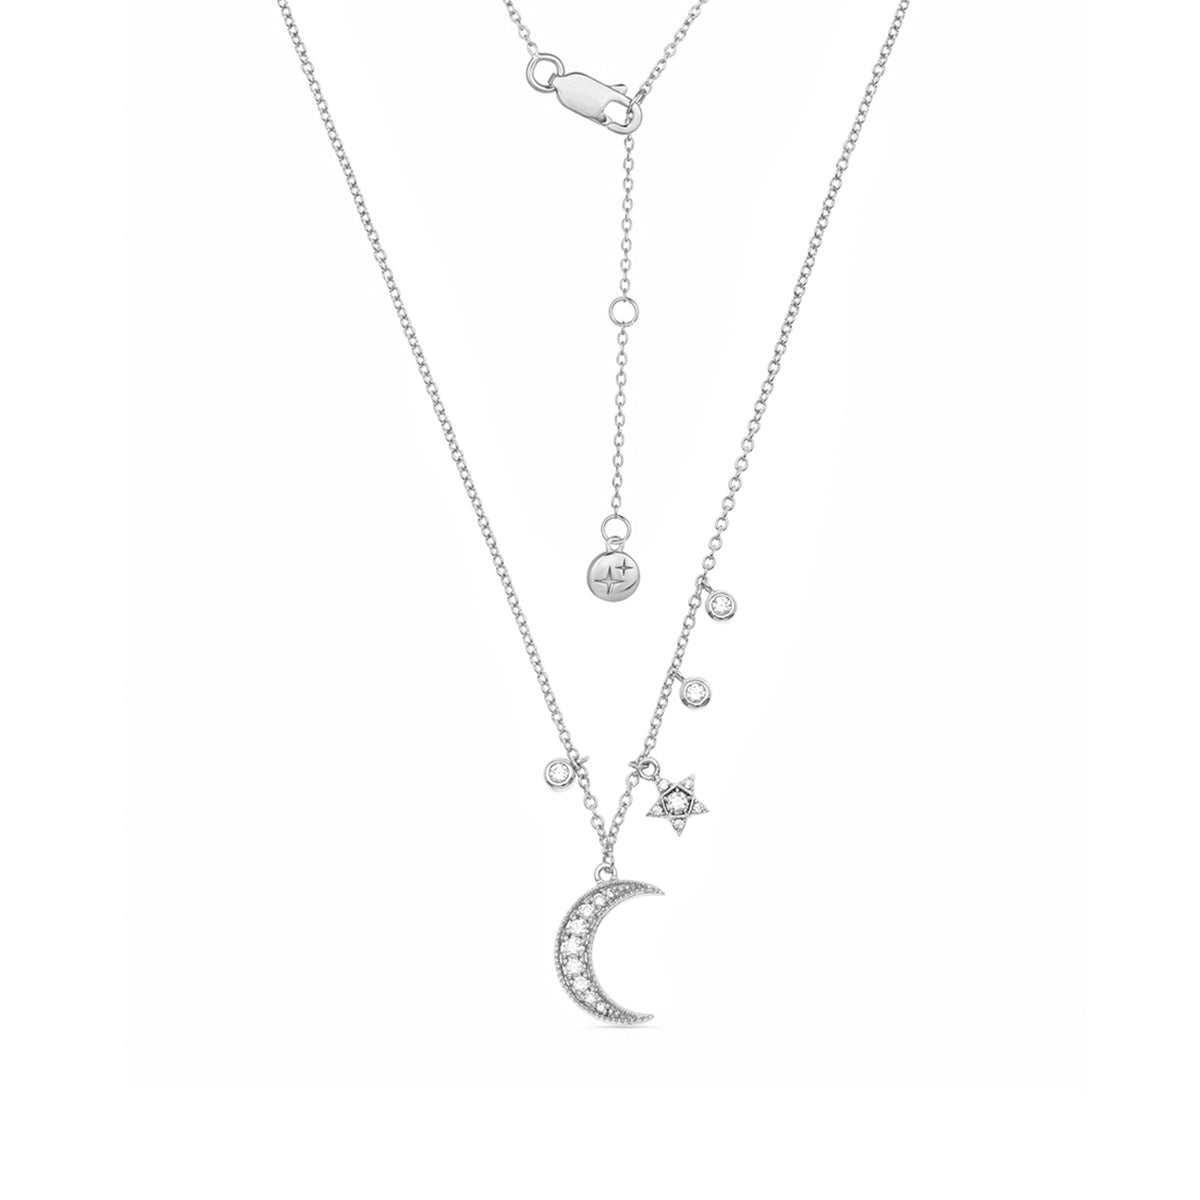 Celestial Adjustable Necklace With Cubic Zirconia Sterling Silver